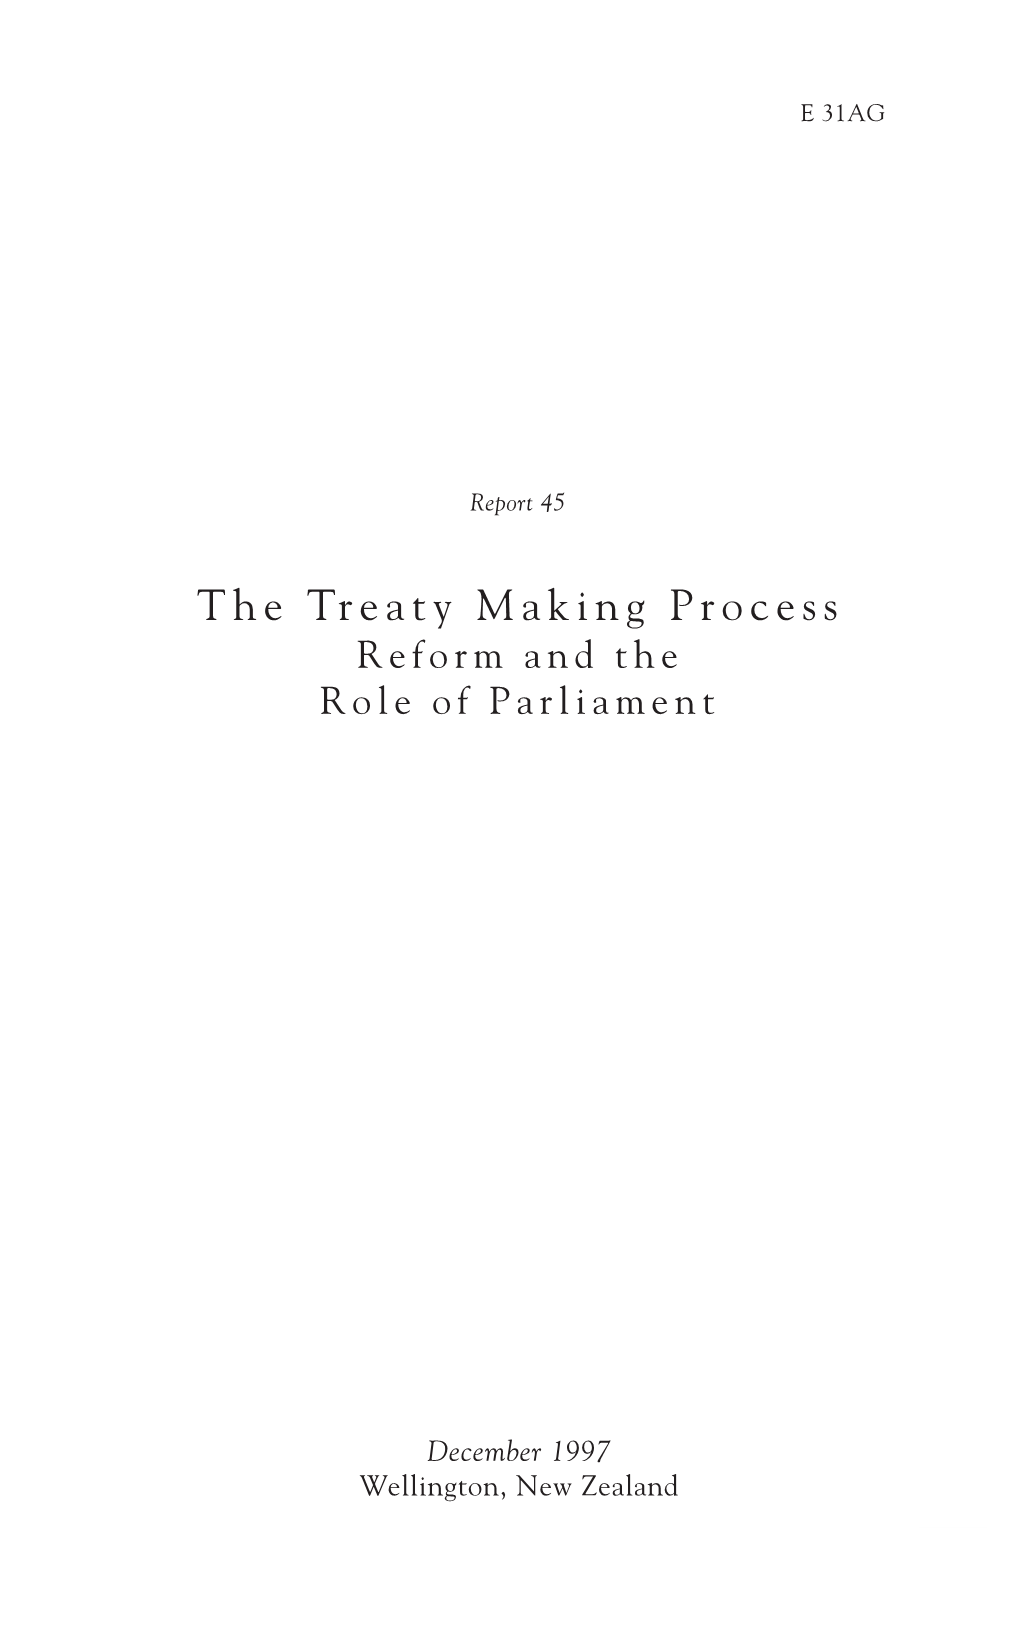 The Treaty Making Process: Reform and the Role of Parliament